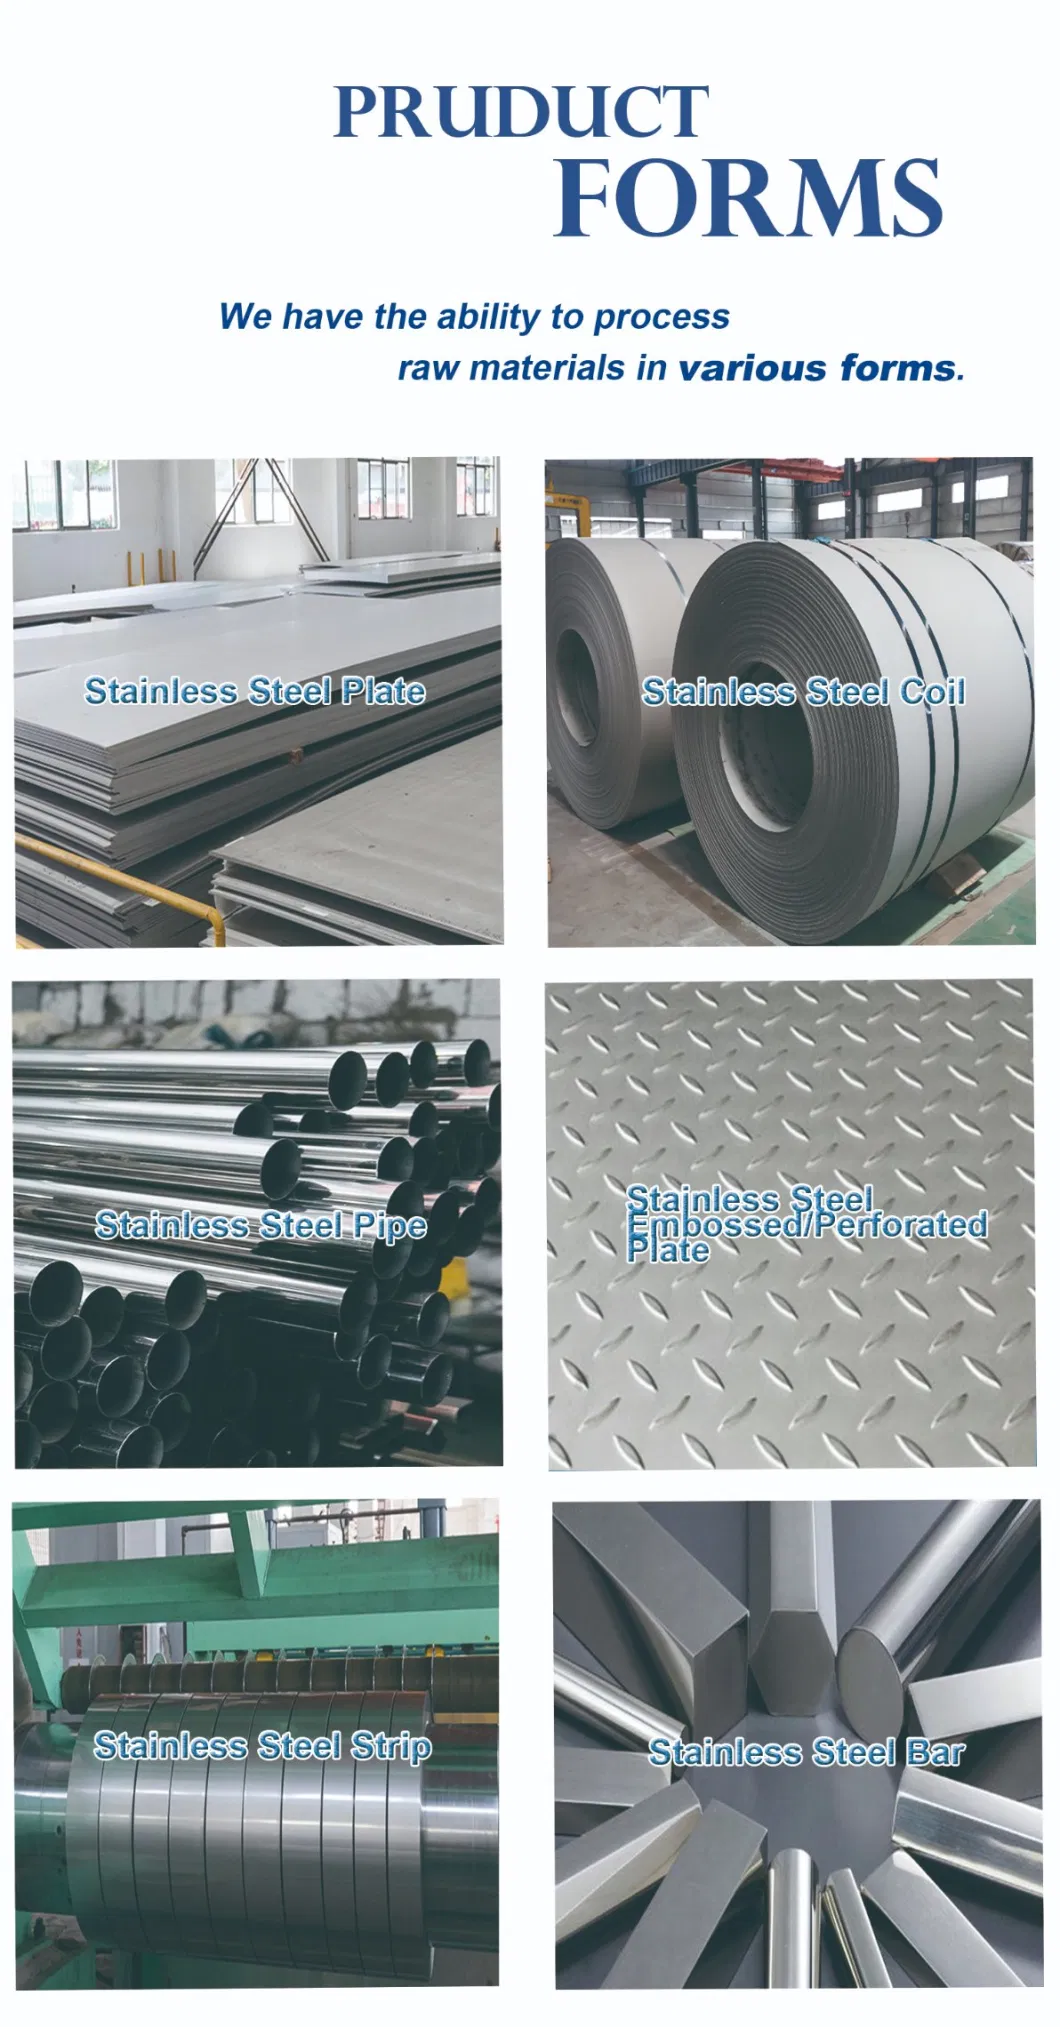 Aluminum Stainless Steel Honeycomb Round Hole Punching Perforated Metal Screen Sheet Plate